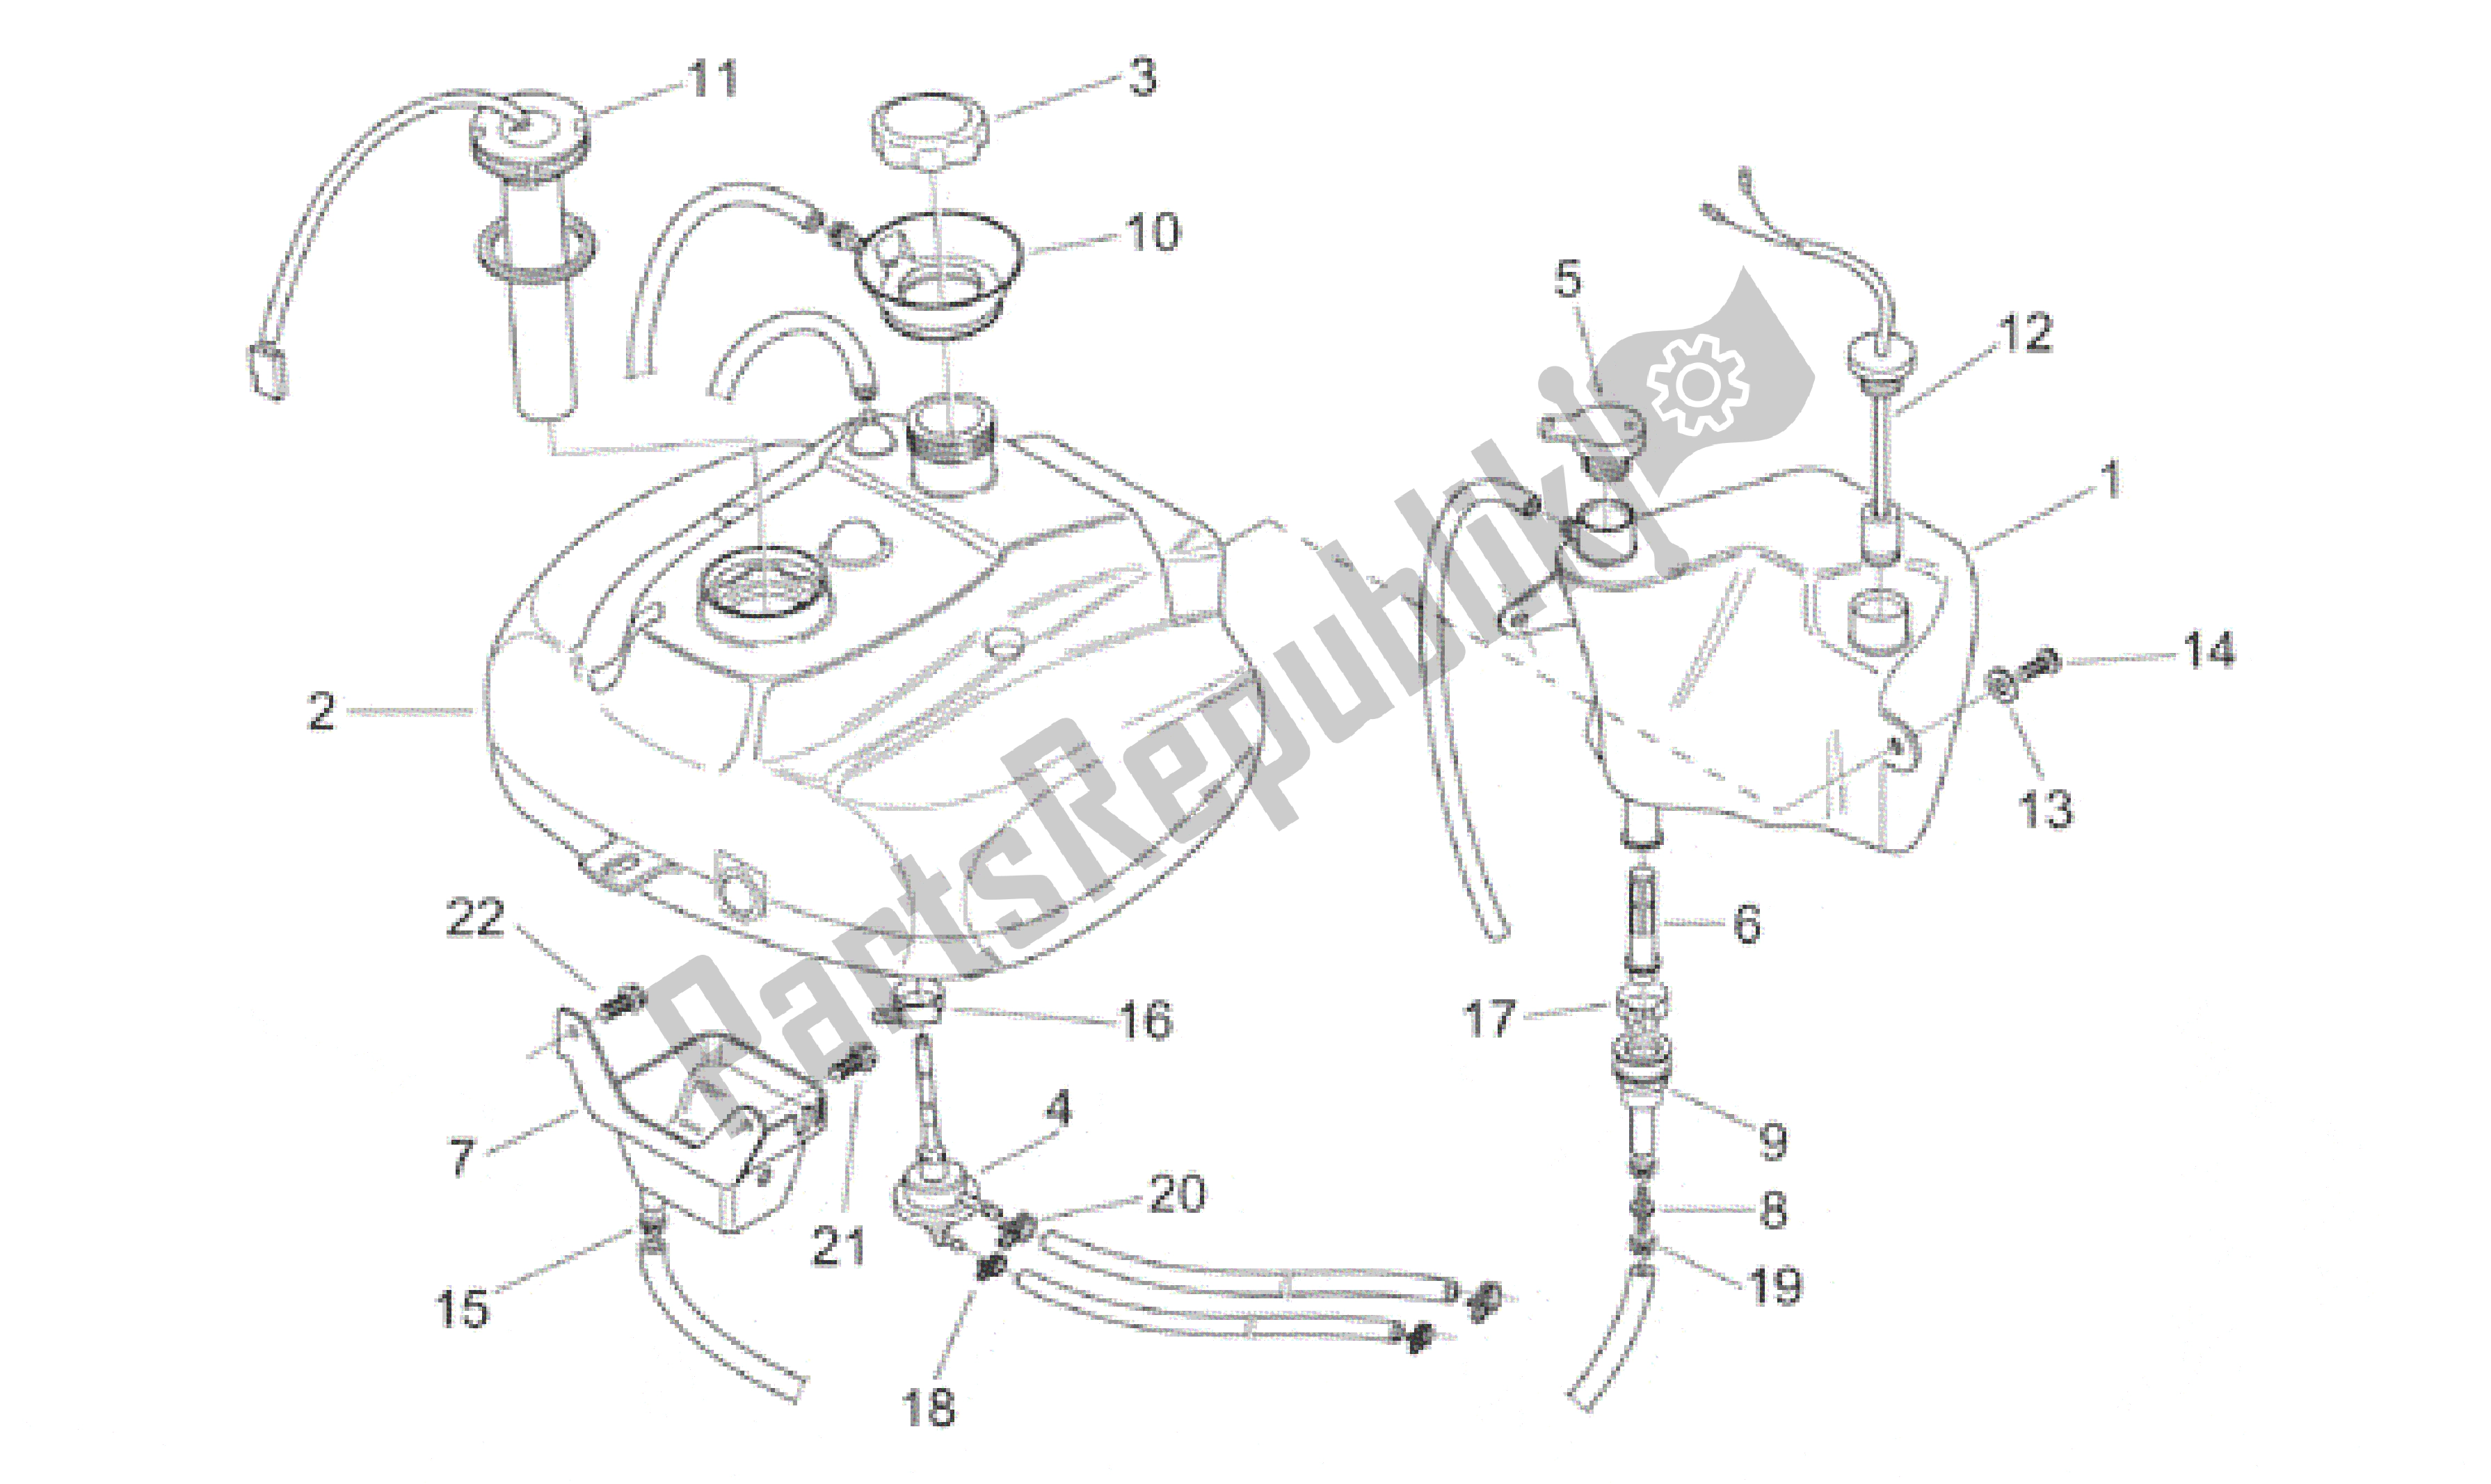 All parts for the Oil And Fuel Tank of the Aprilia Scarabeo 50 1999